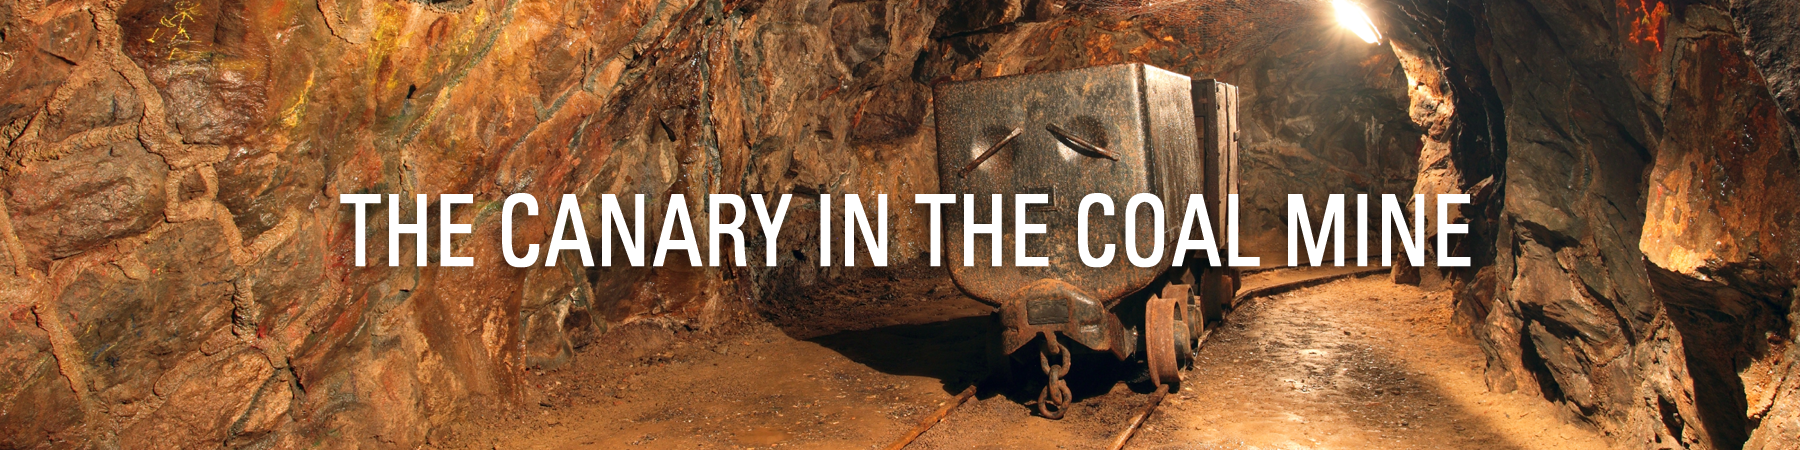 The Canary in The Coal Mine